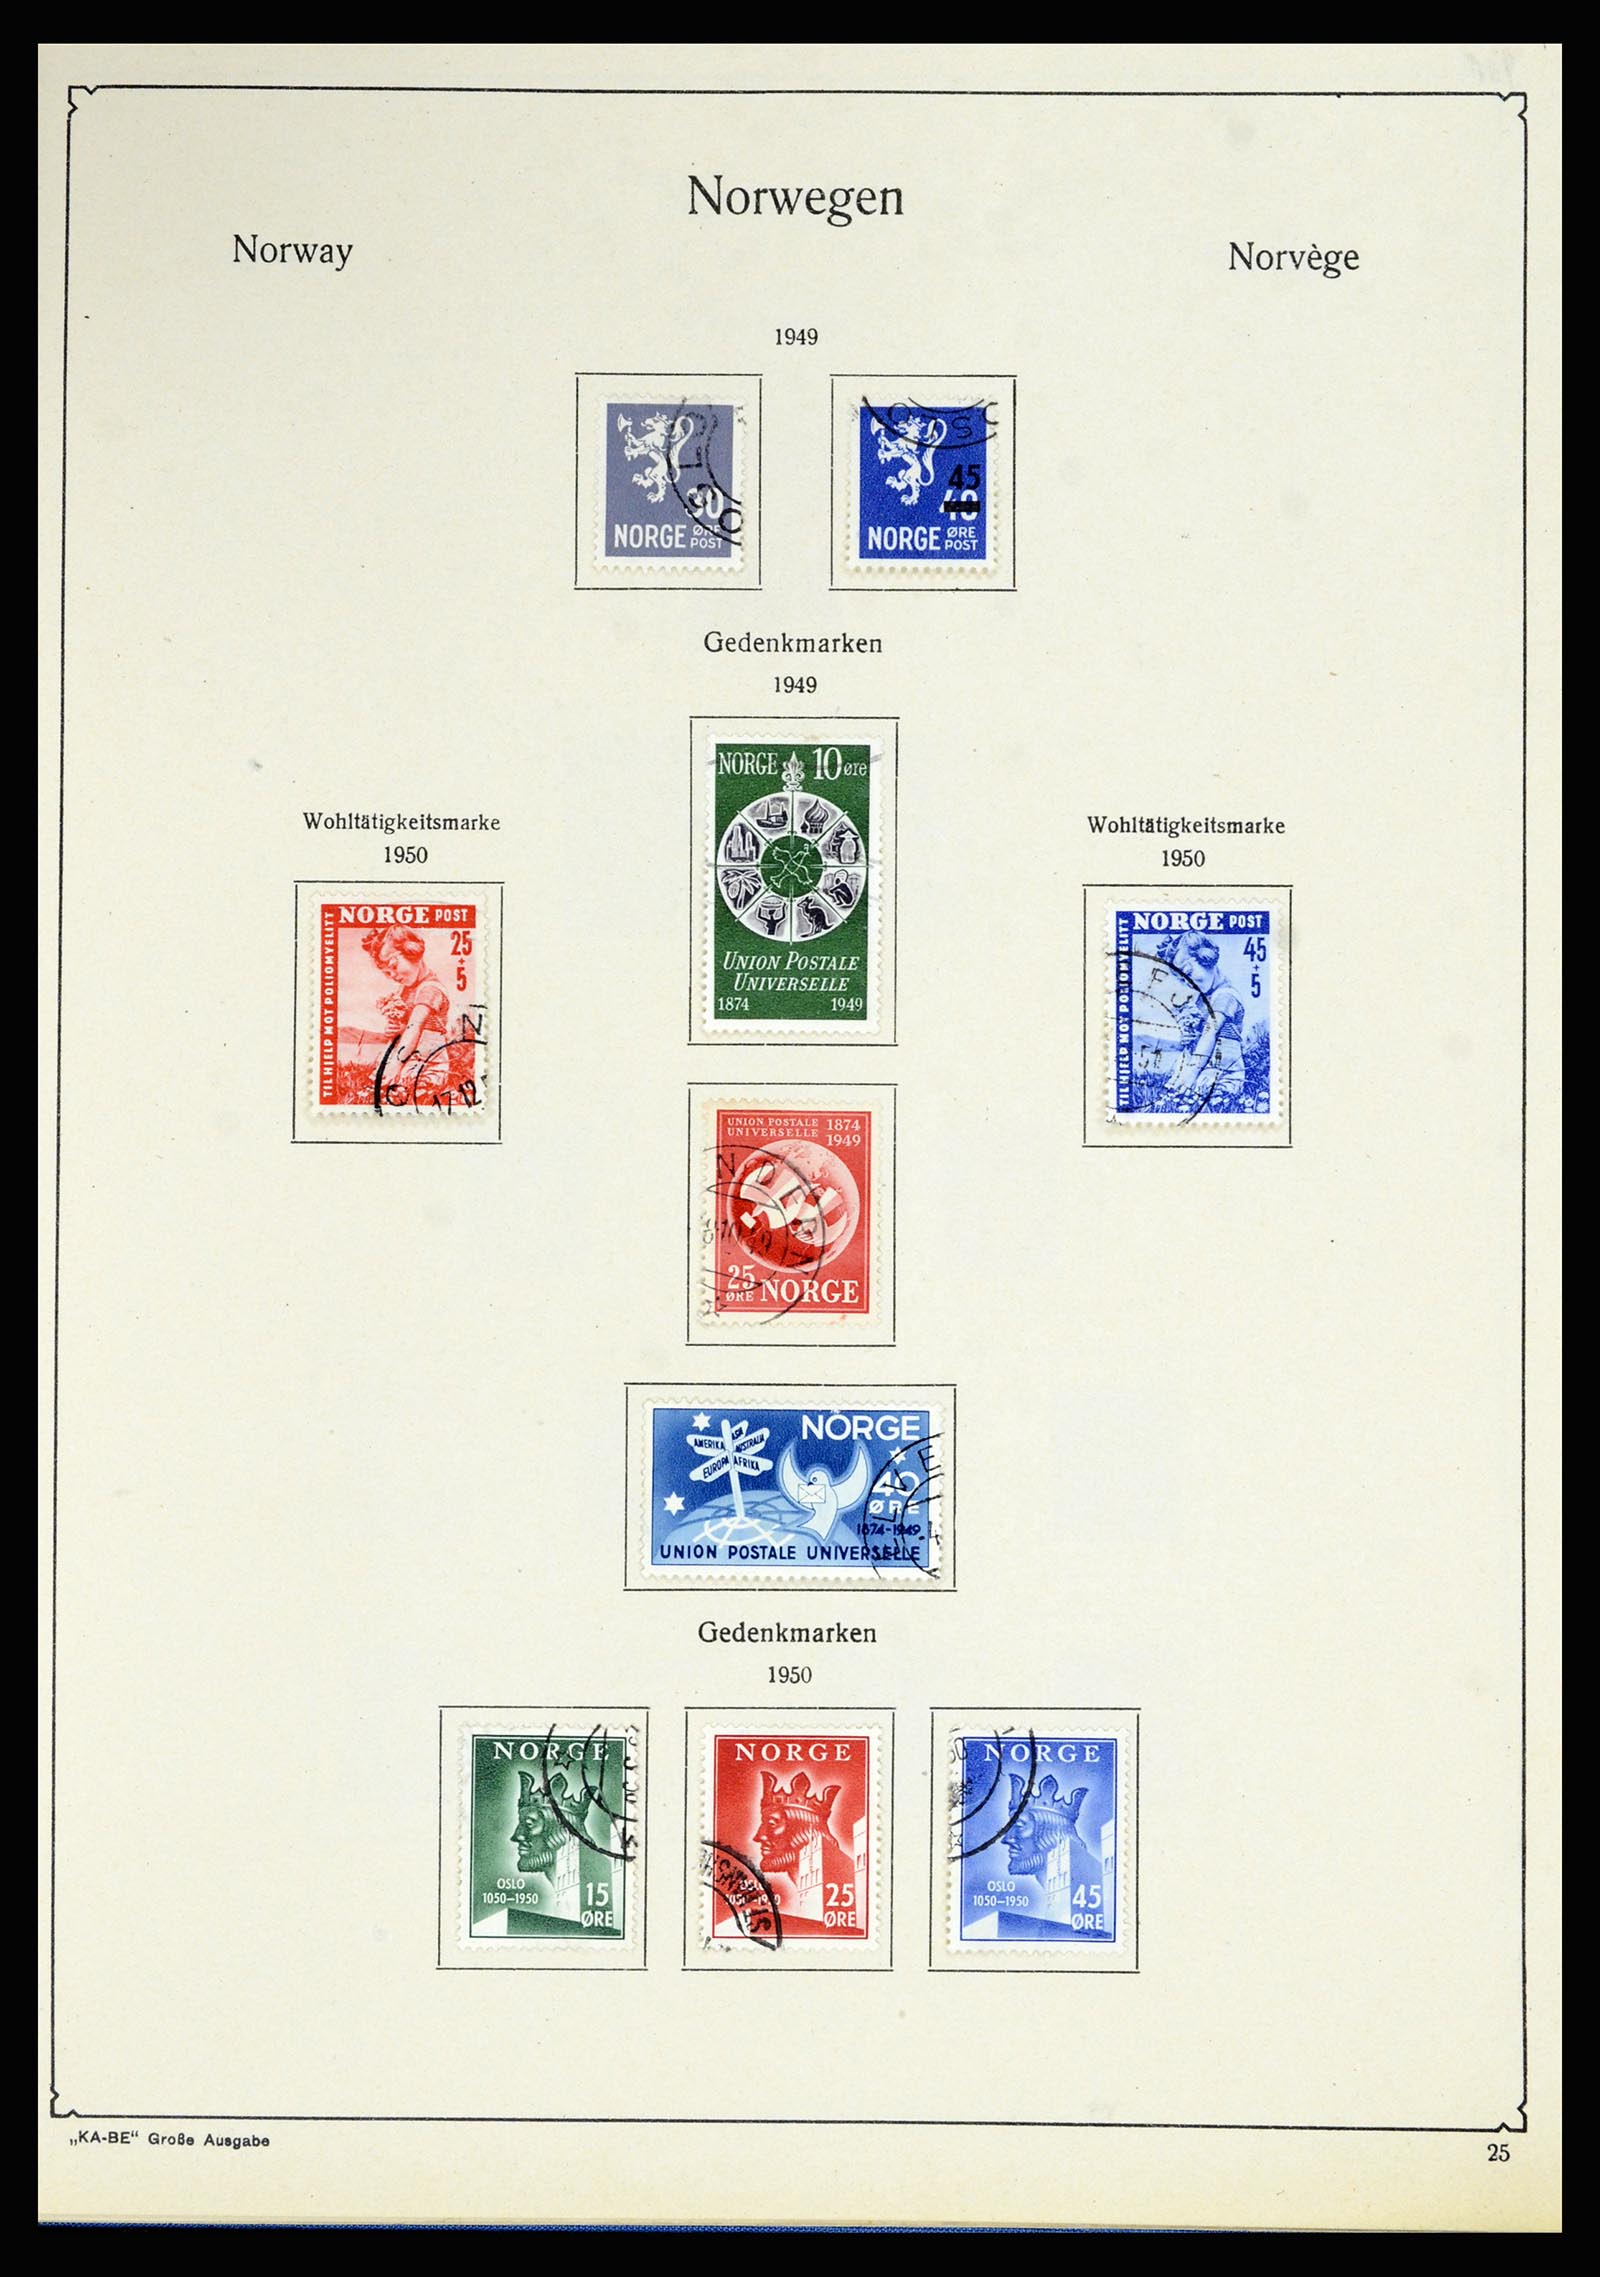 36903 025 - Stamp collection 36903 Norway 1856-1970.